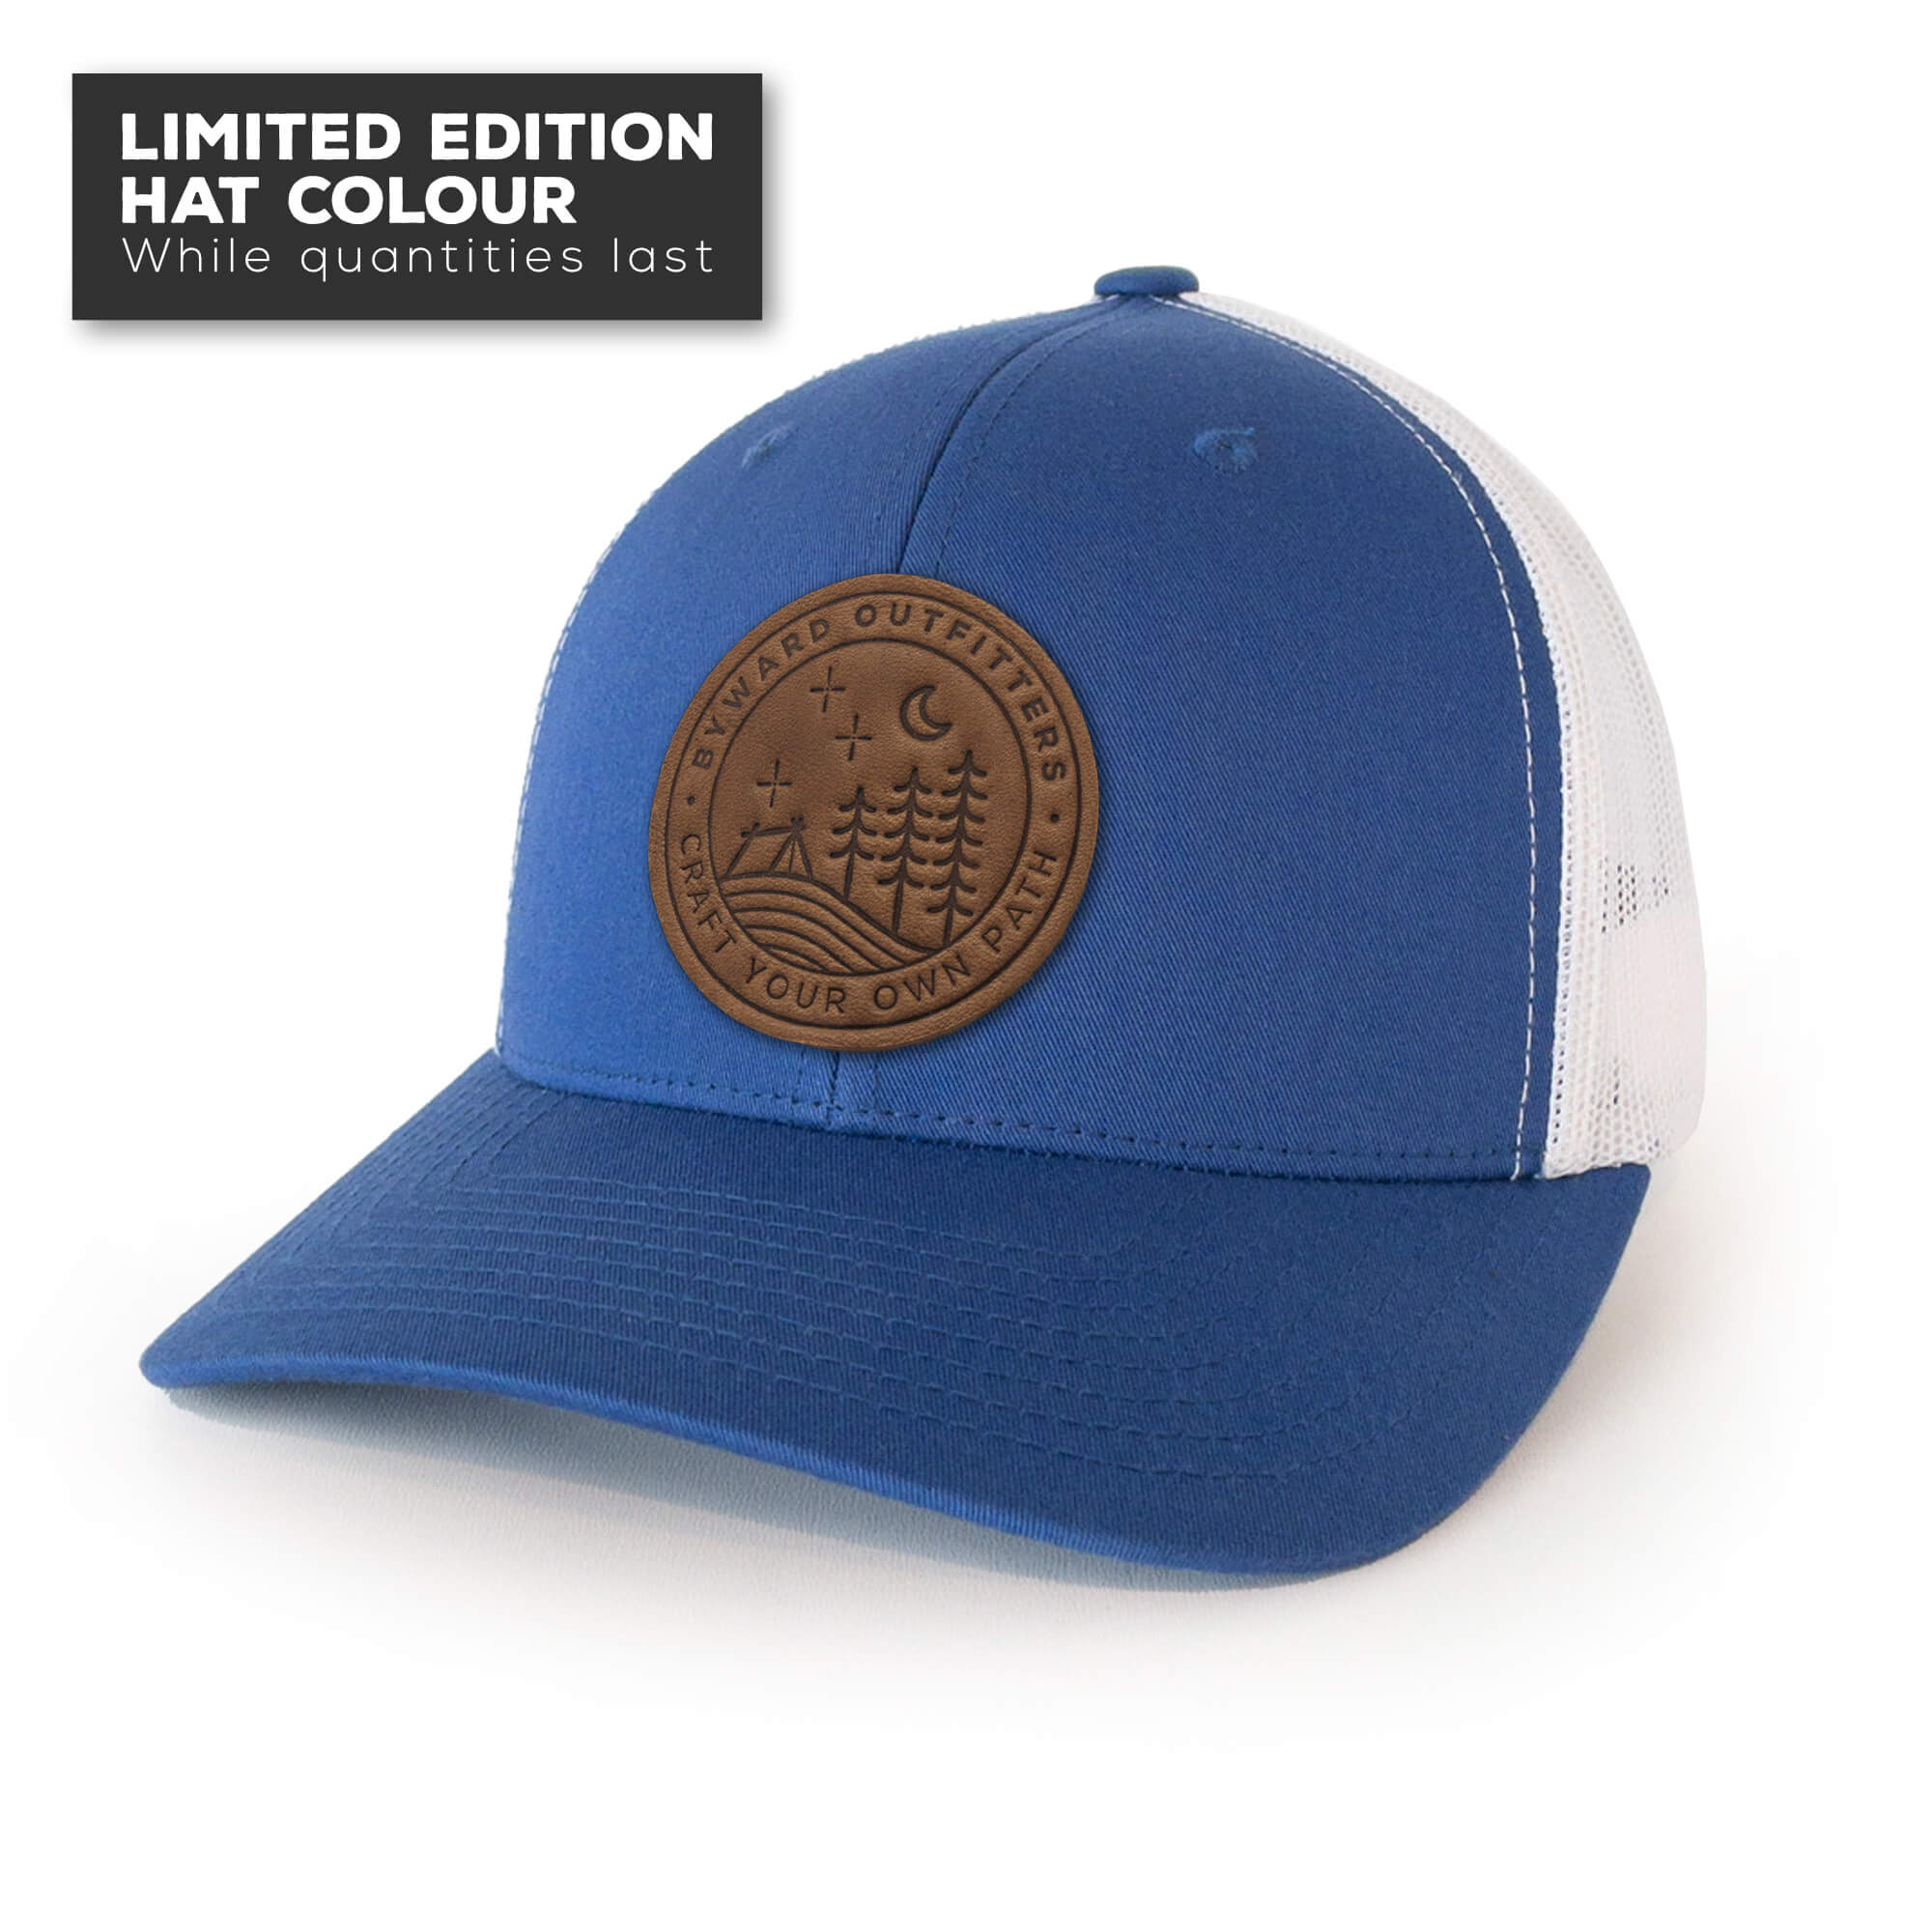 Royal Blue trucker hat with full-grain leather patch of Stellar Night